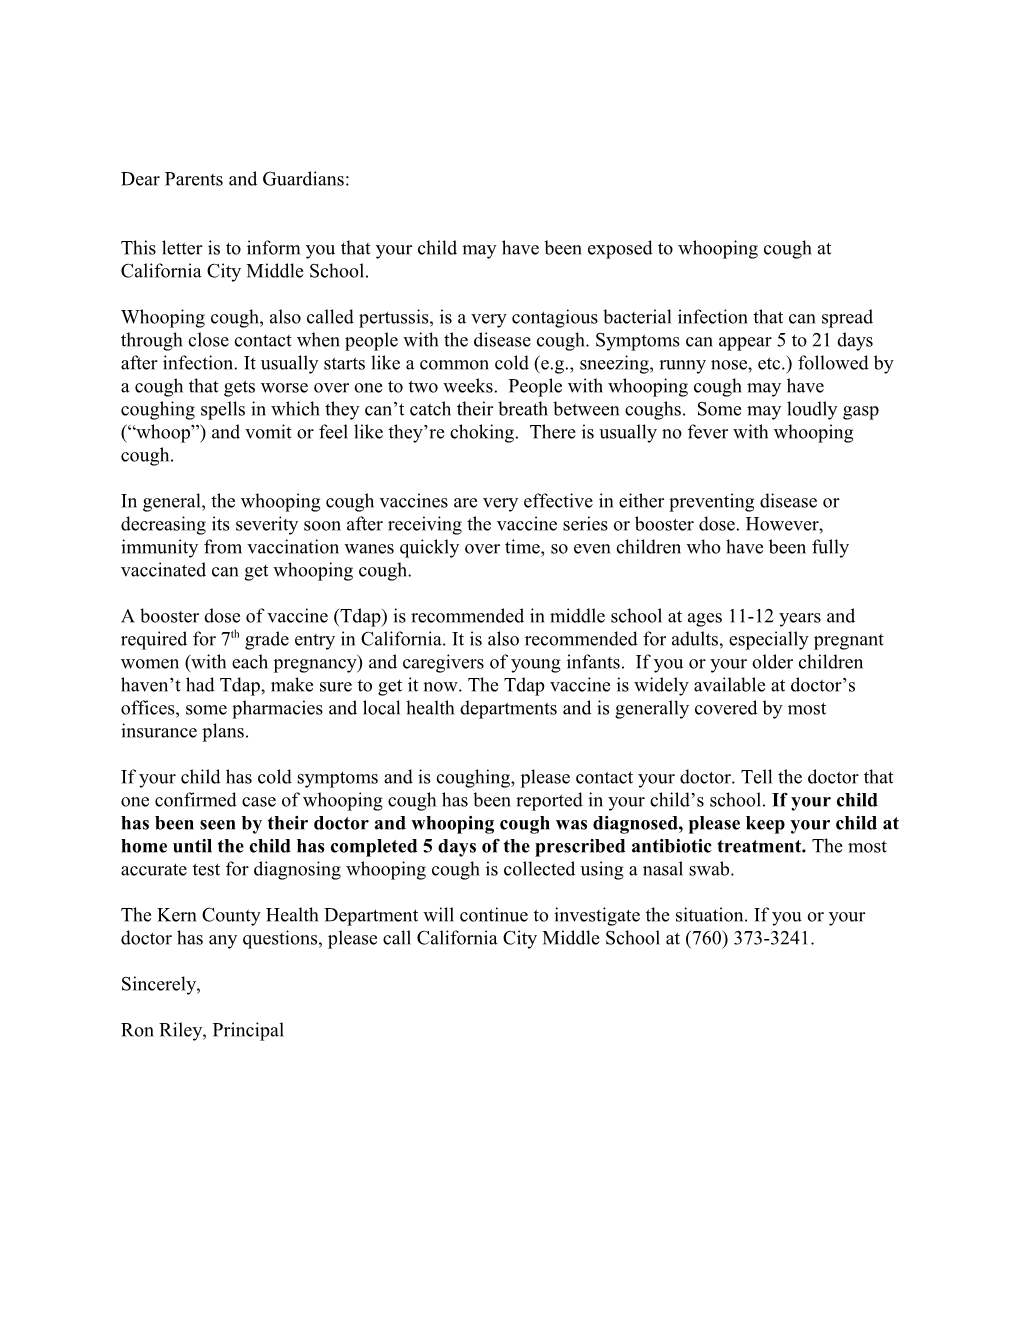 Pertussis (Whooping Cough) Notification Letter Template